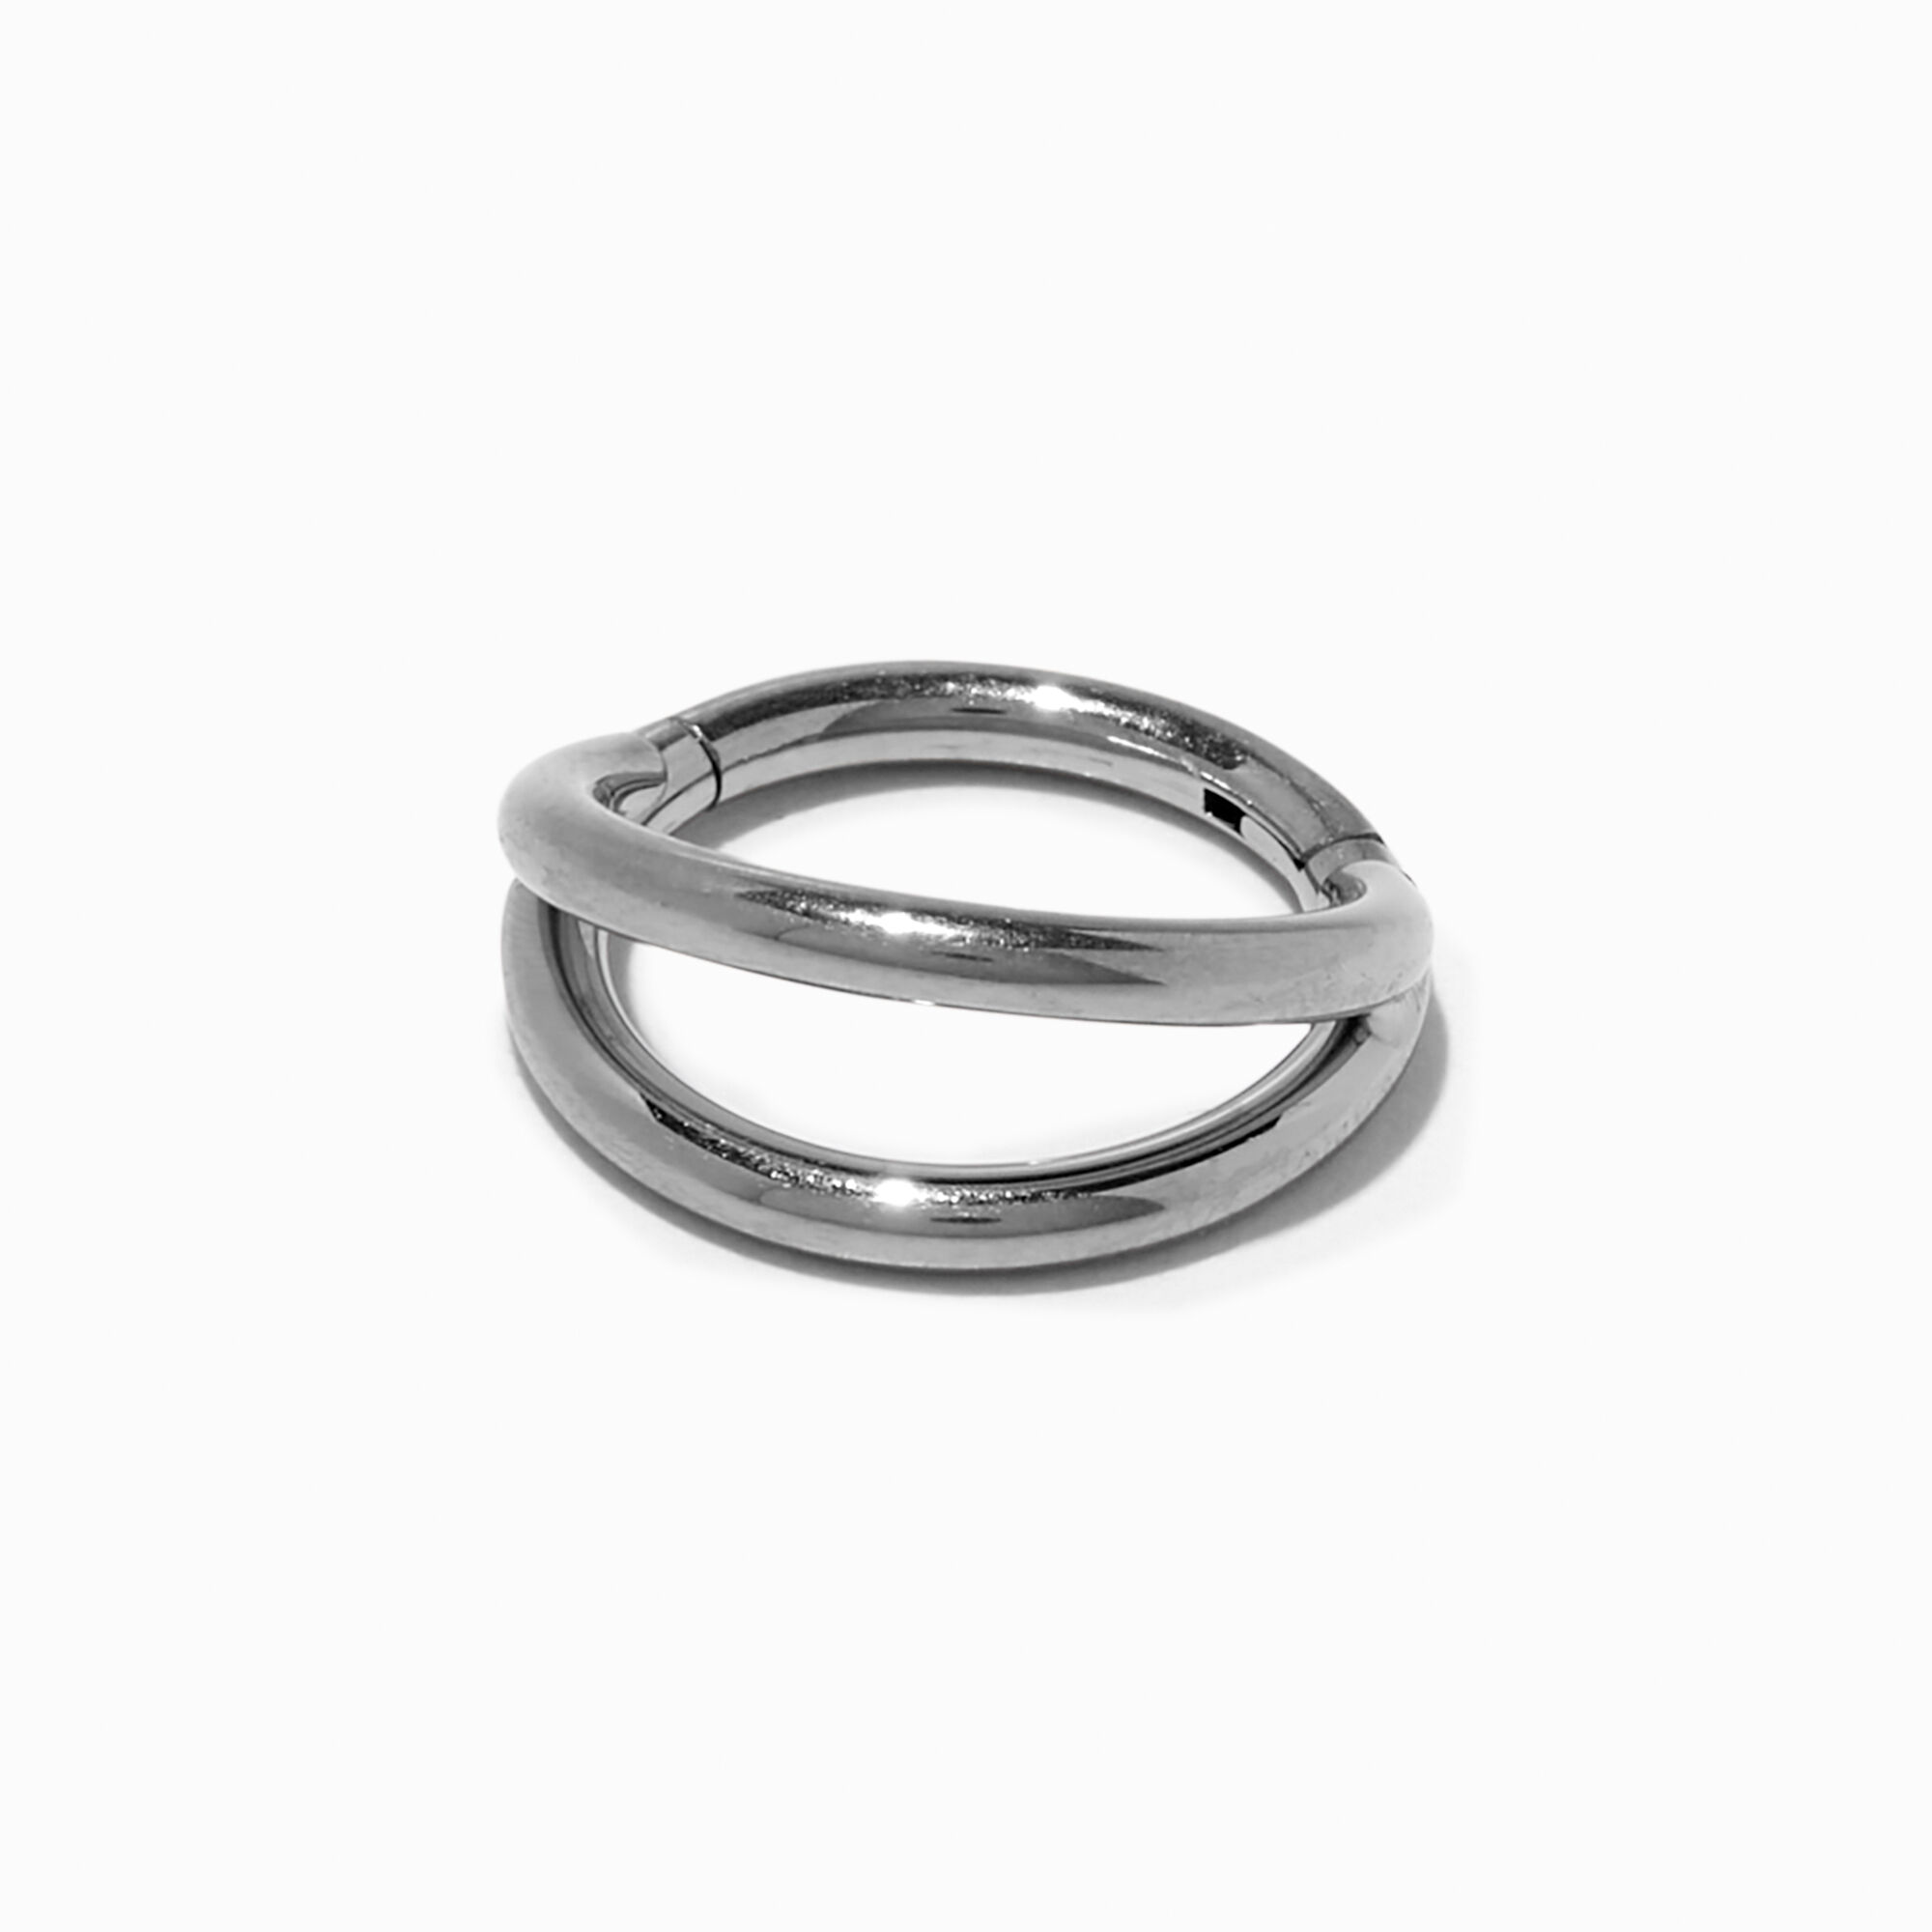 View Claires Tone 16G Double Row Titanium Nose Ring Silver information